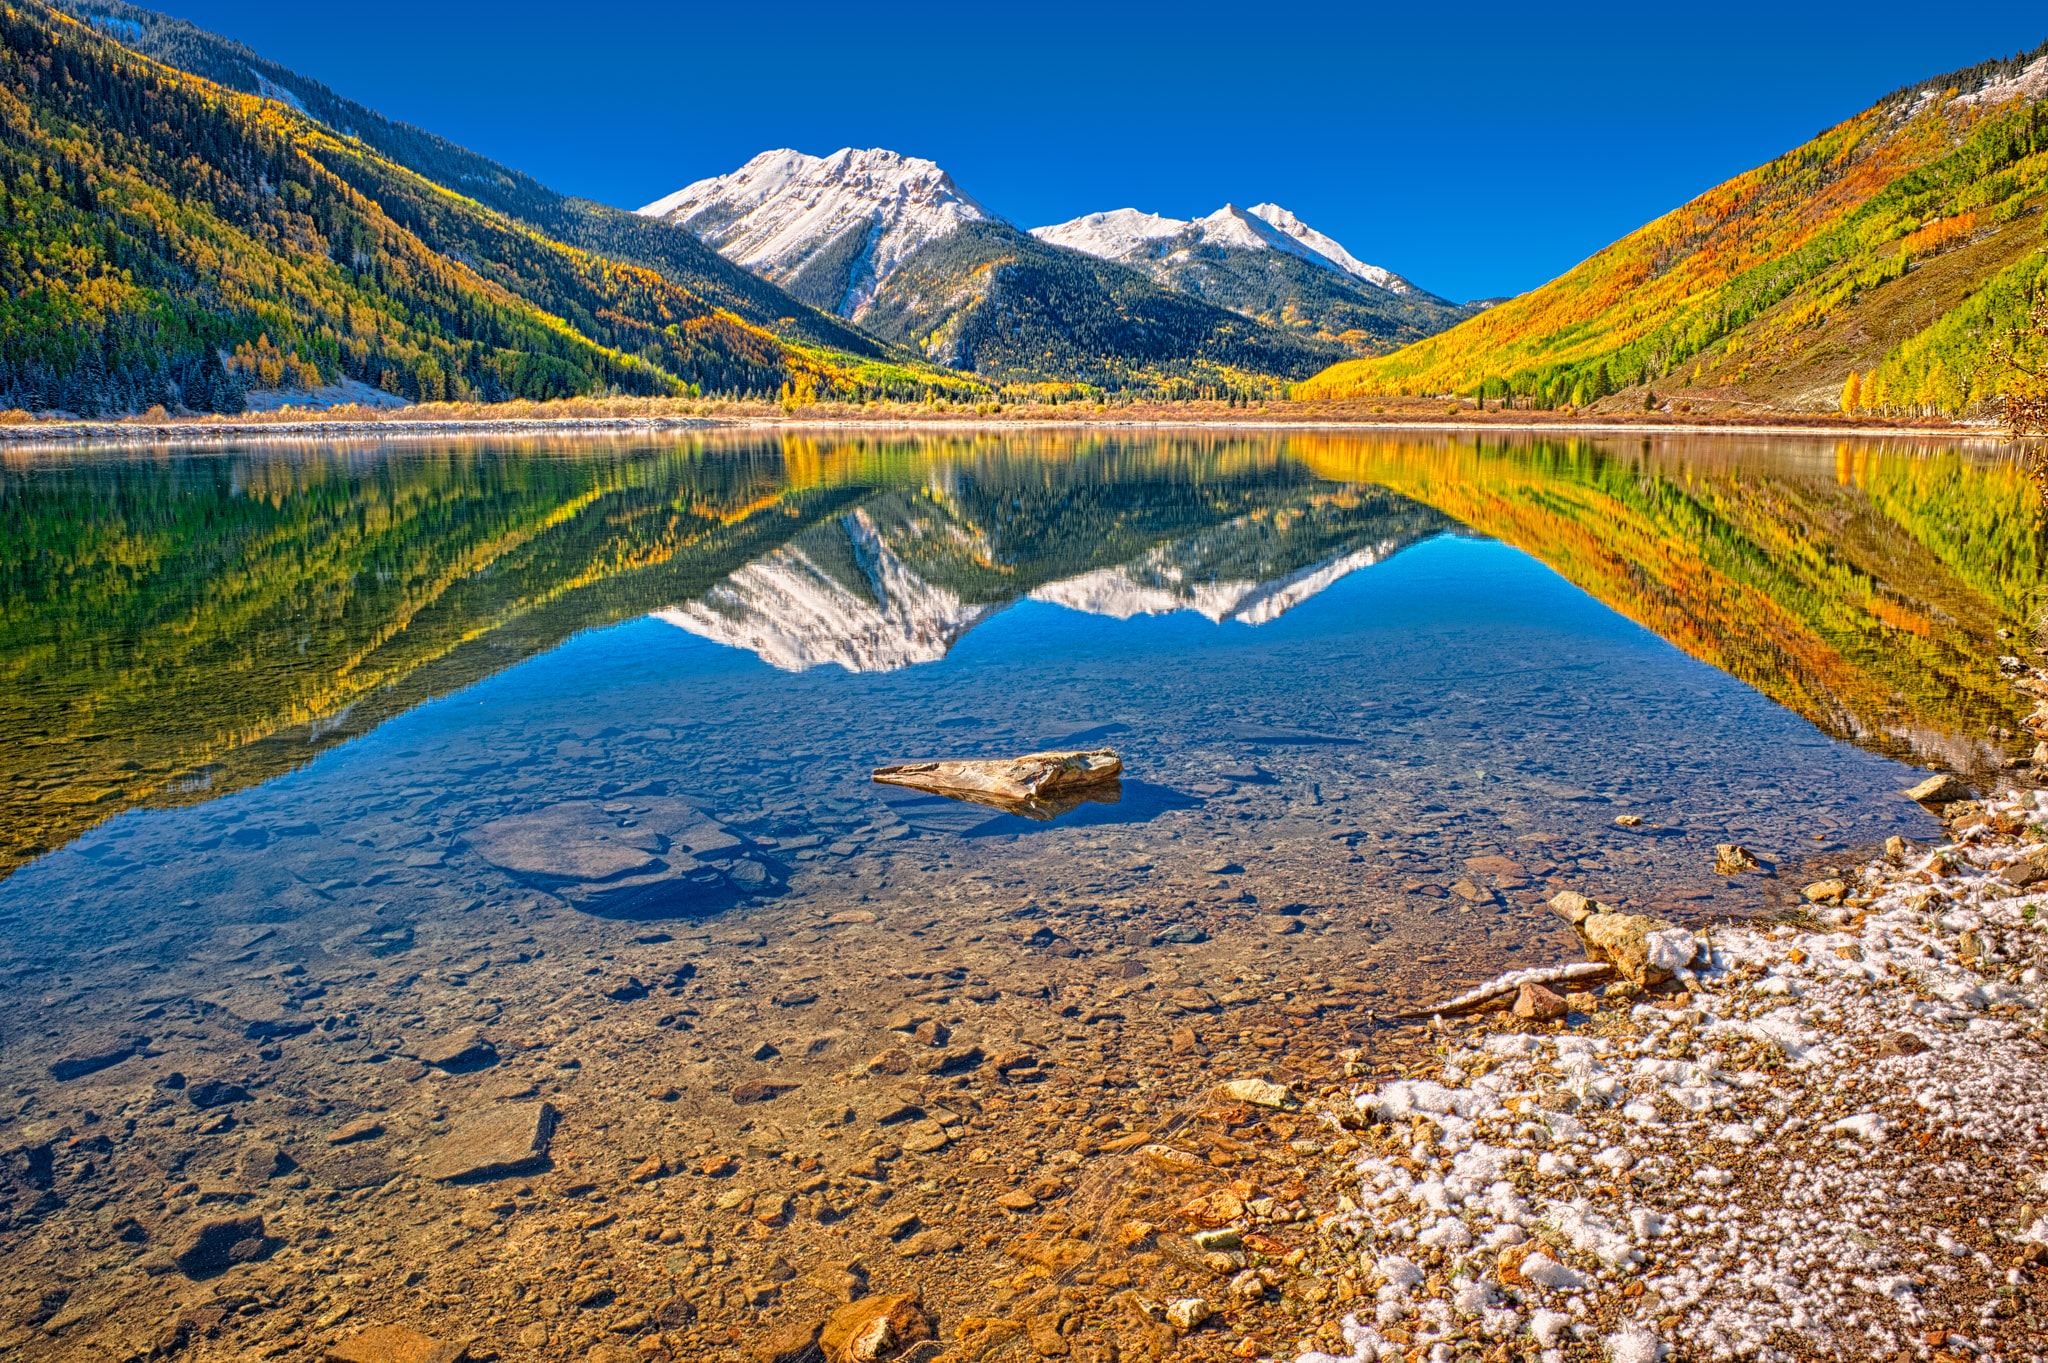 Snowy Red Mountain and autumn aspens are reflected in Crystal Lake, located on US 550 near Ironton, Colorado.